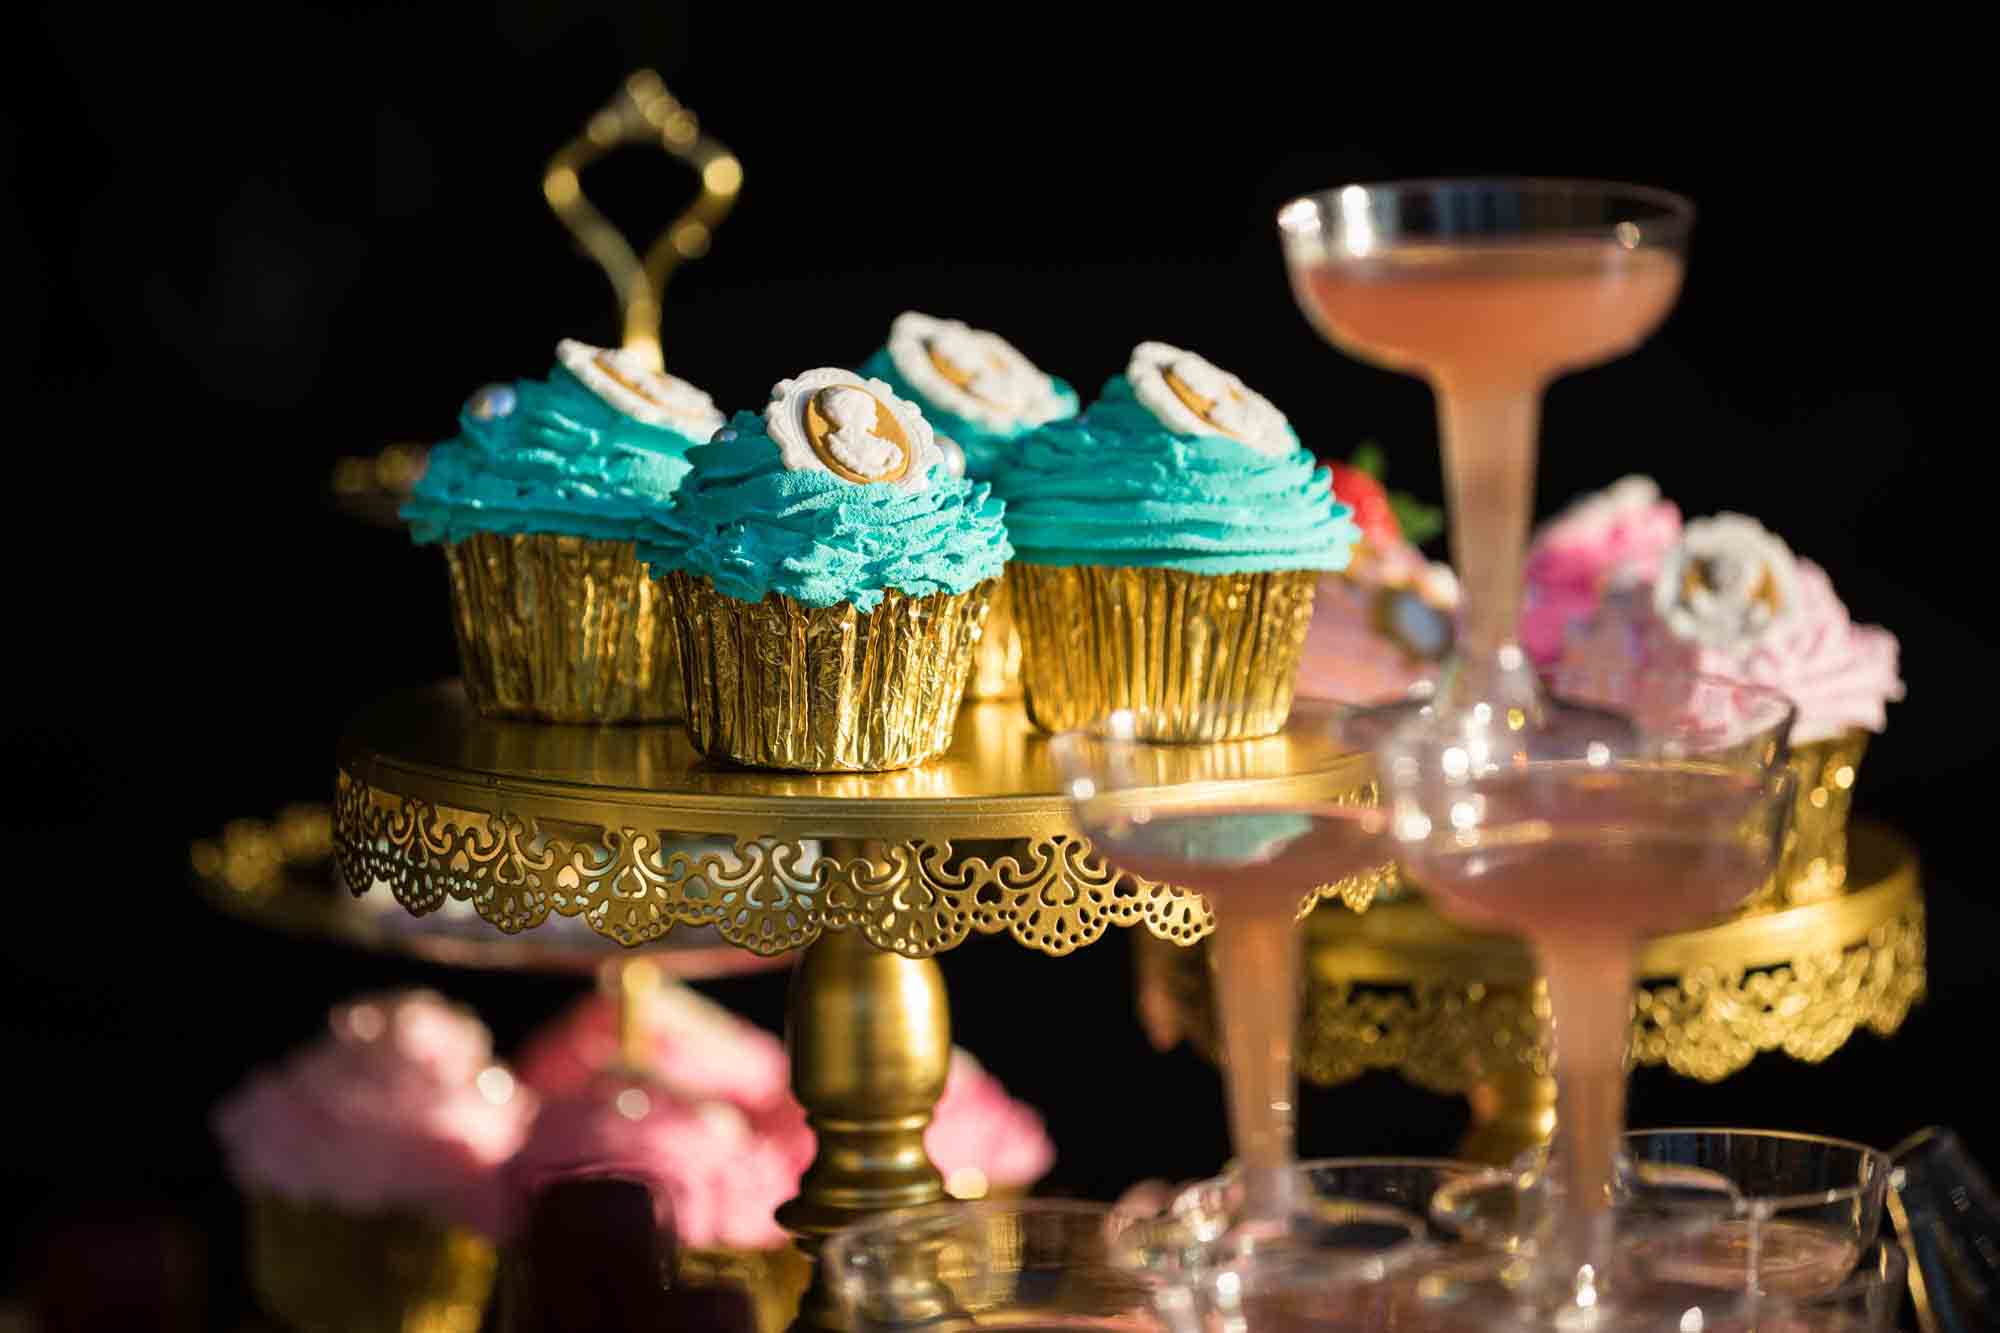 Tower of aqua and pink frosted cupcakes on a table of elaborately decorated desserts